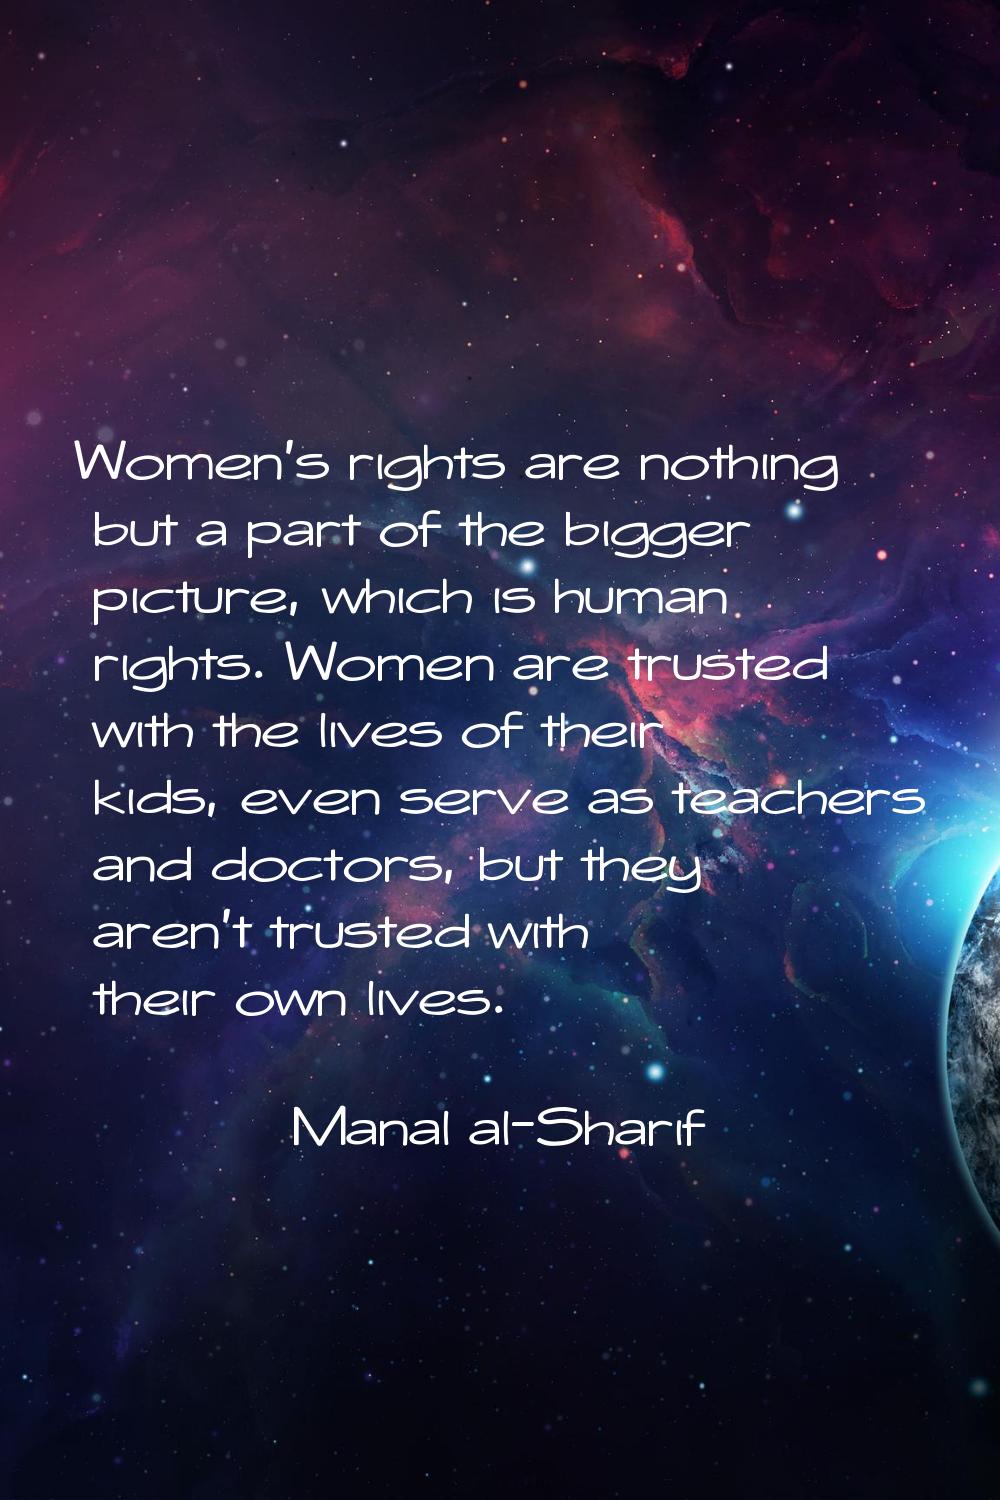 Women's rights are nothing but a part of the bigger picture, which is human rights. Women are trust